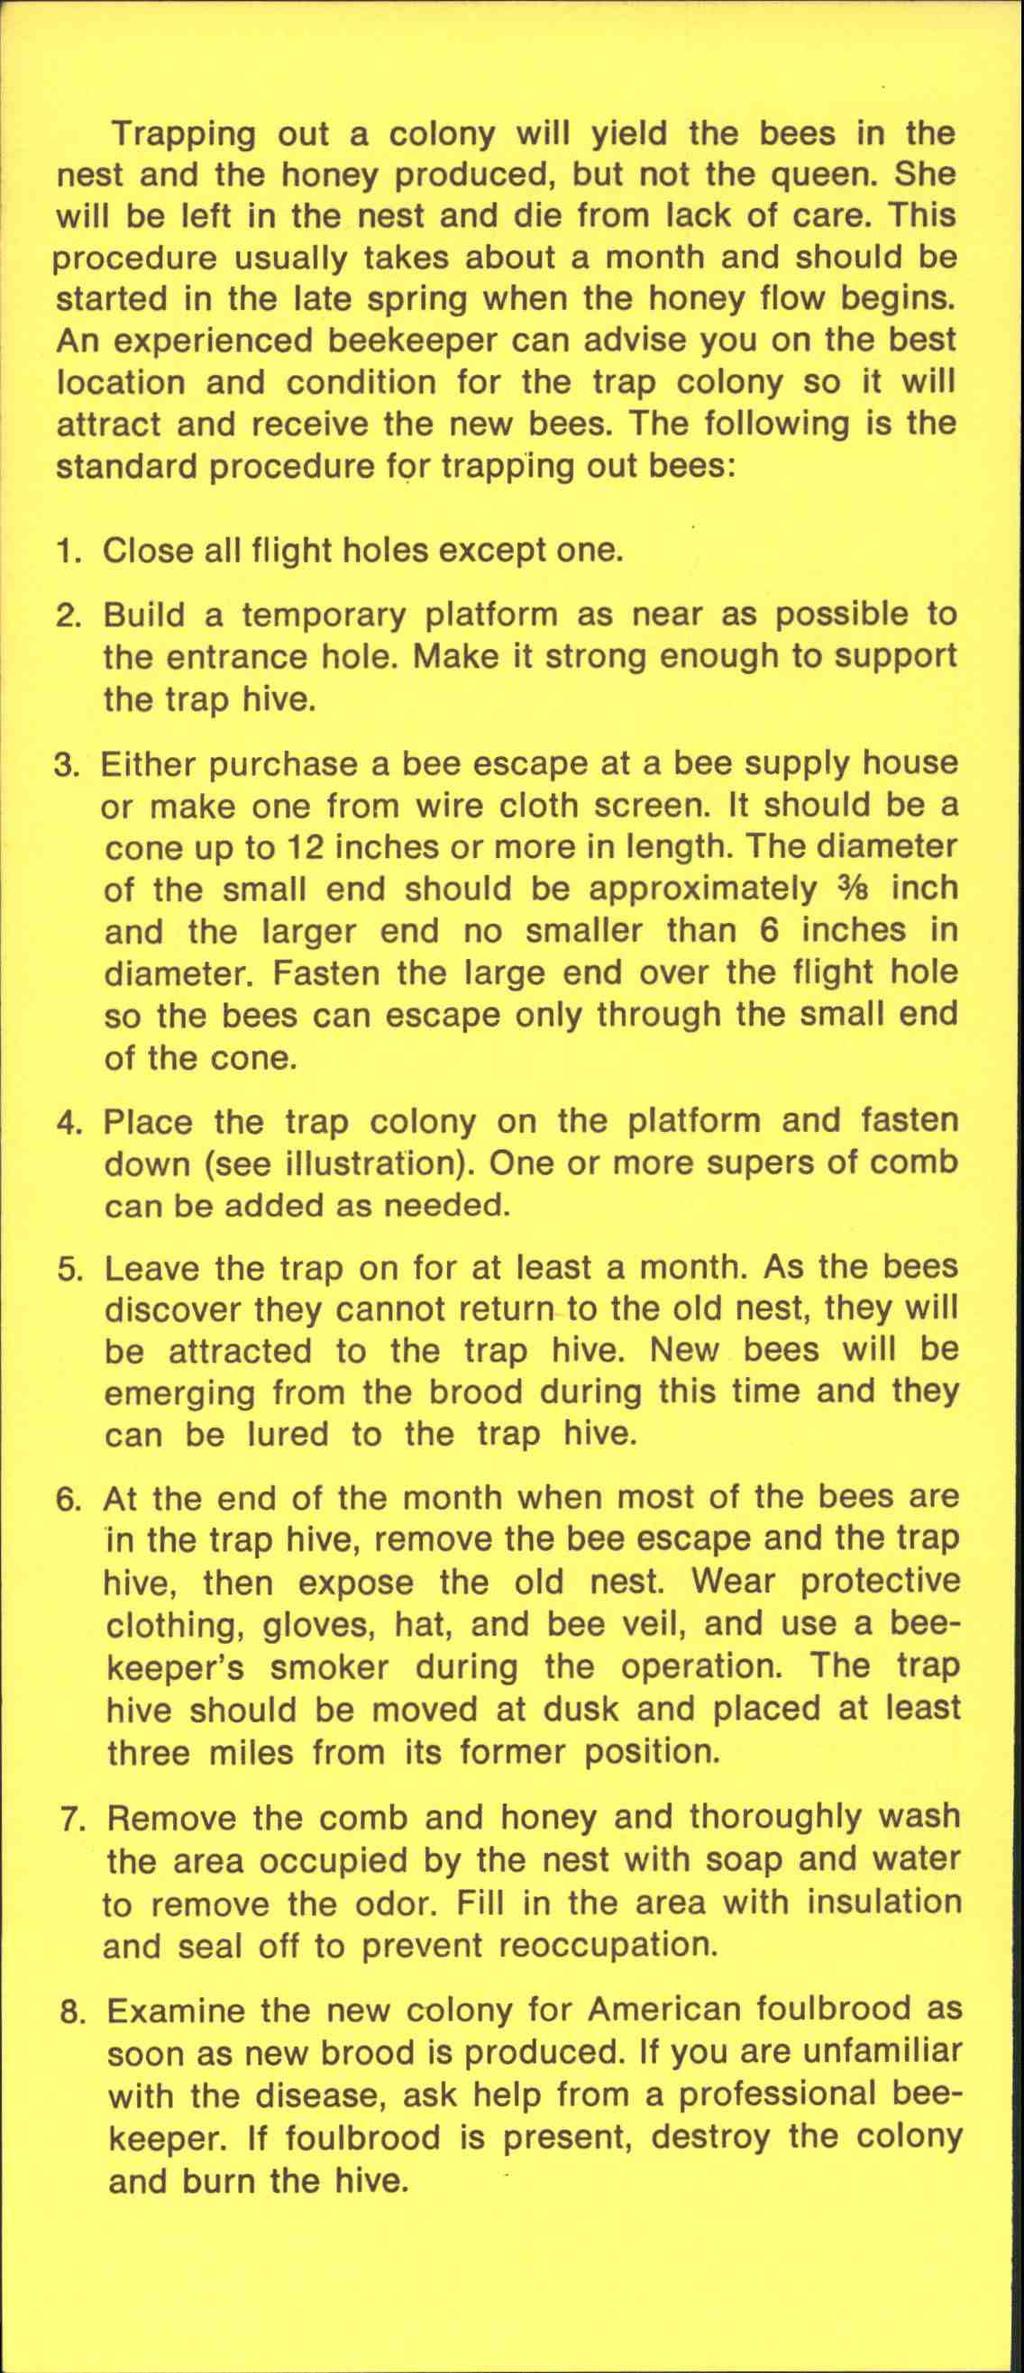 Trapping out a colony will yield the bees in the nest and the honey produced, but not the queen. She will be left in the nest and die from lack of care.